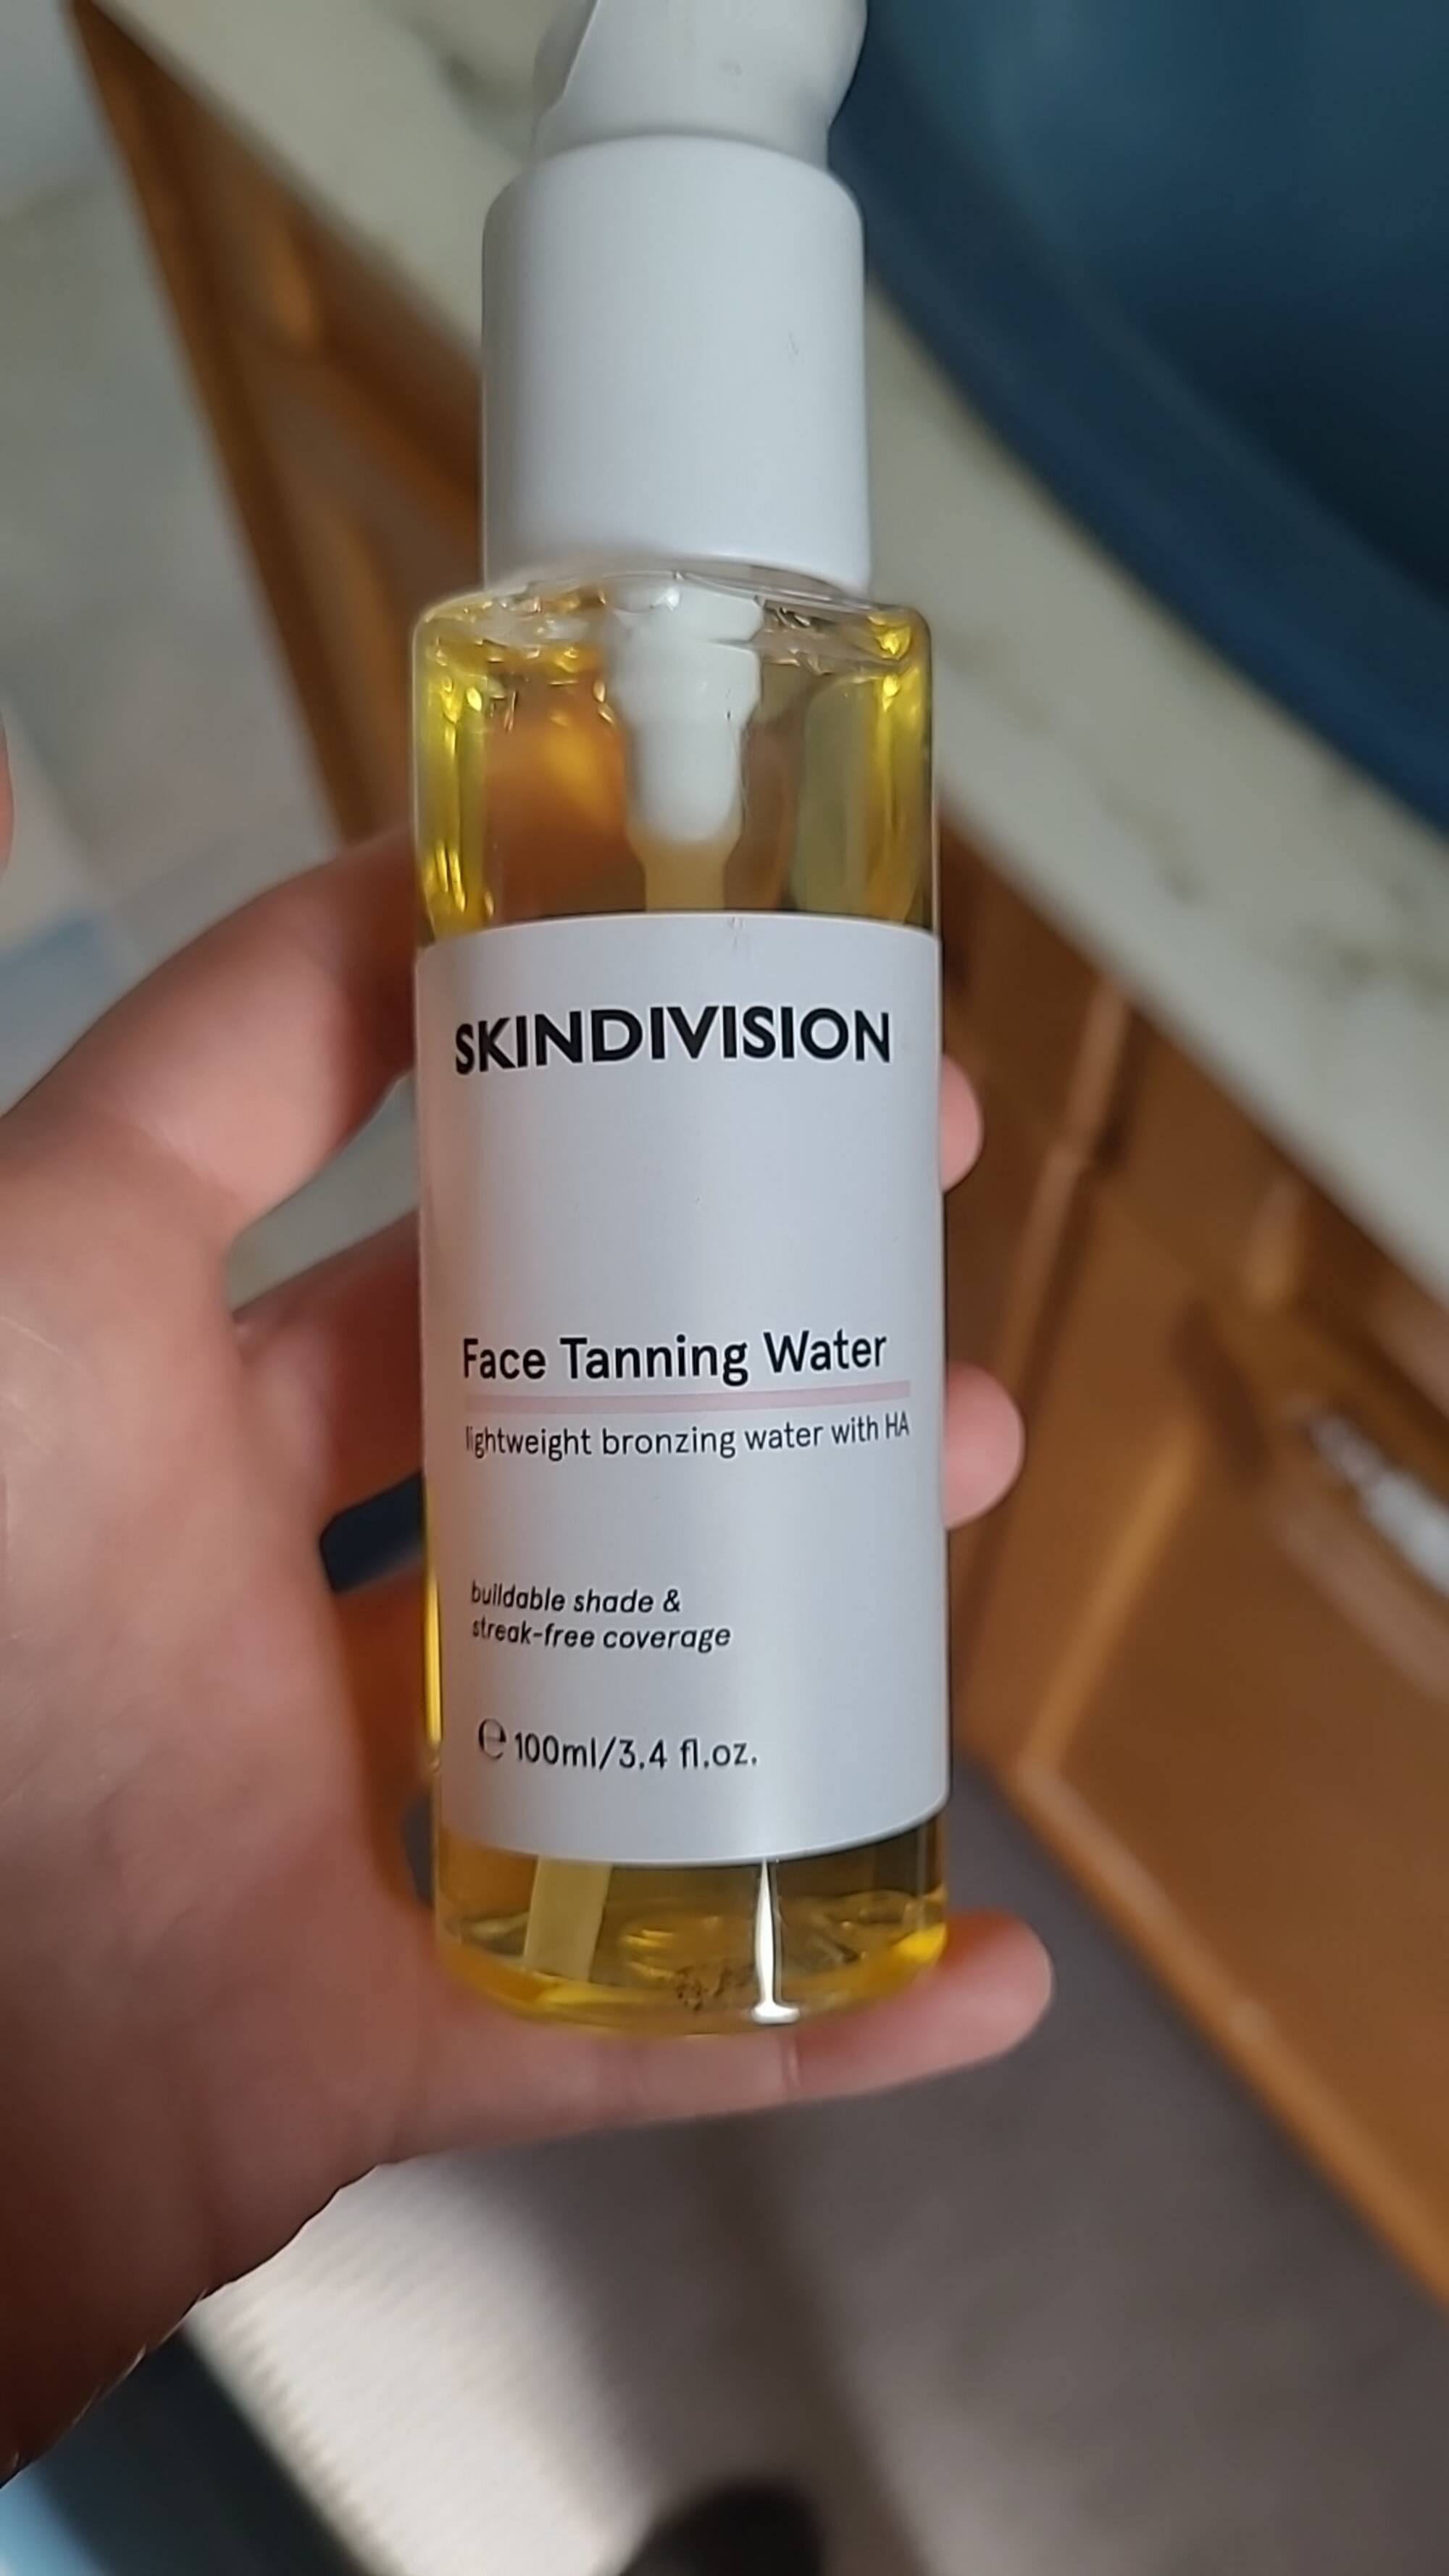 SKINDIVISION - Face tanning water